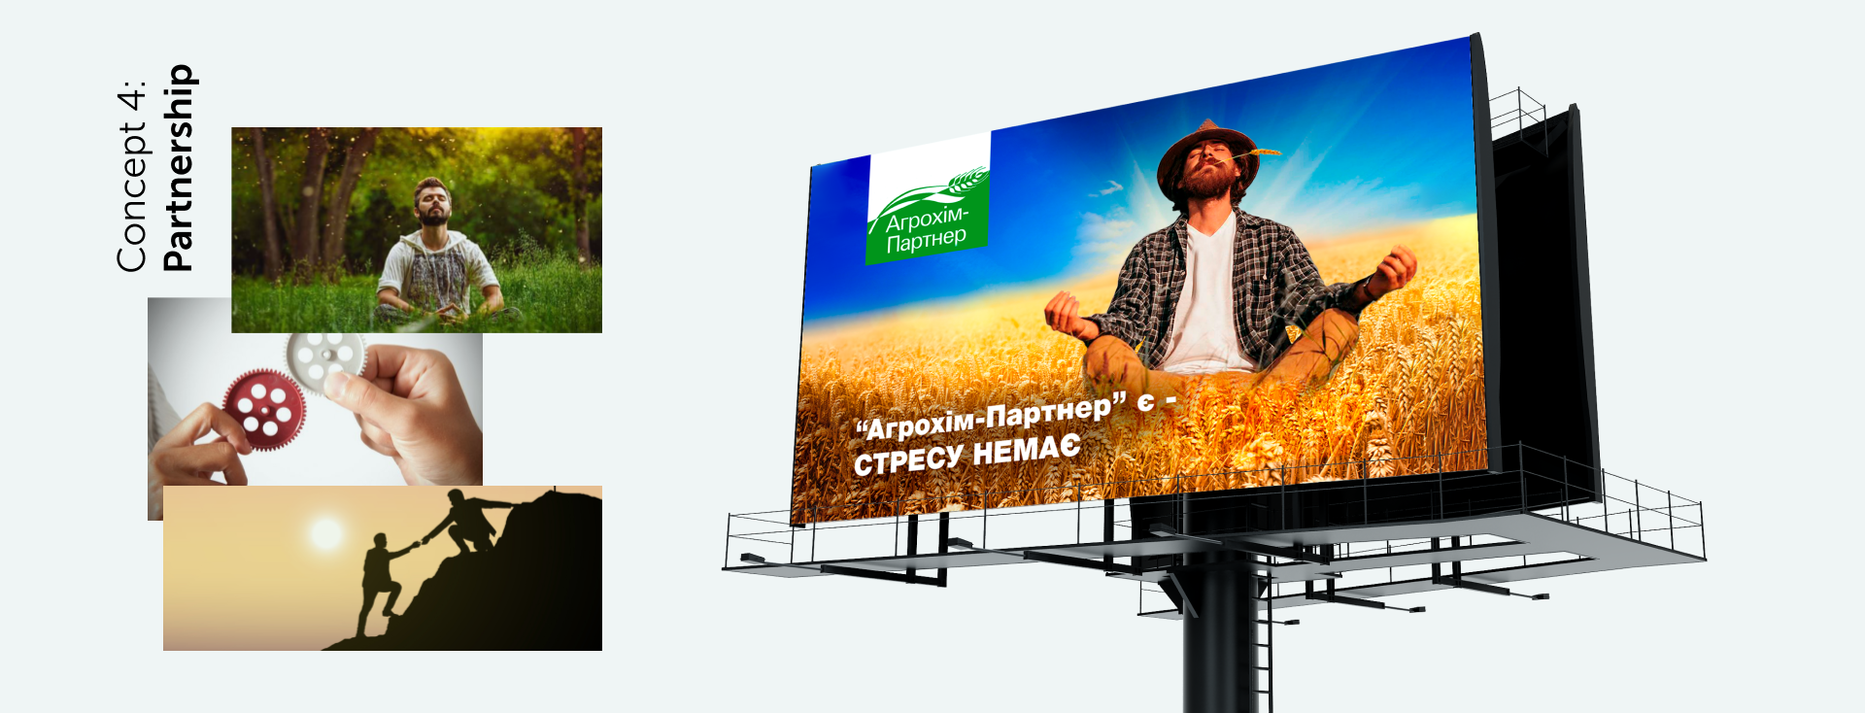 Rebranding of the agricultural company “Agrokhim-Partner”: communication strategy, logo, pattern, corporate style, and website — Rubarb - Image - 5